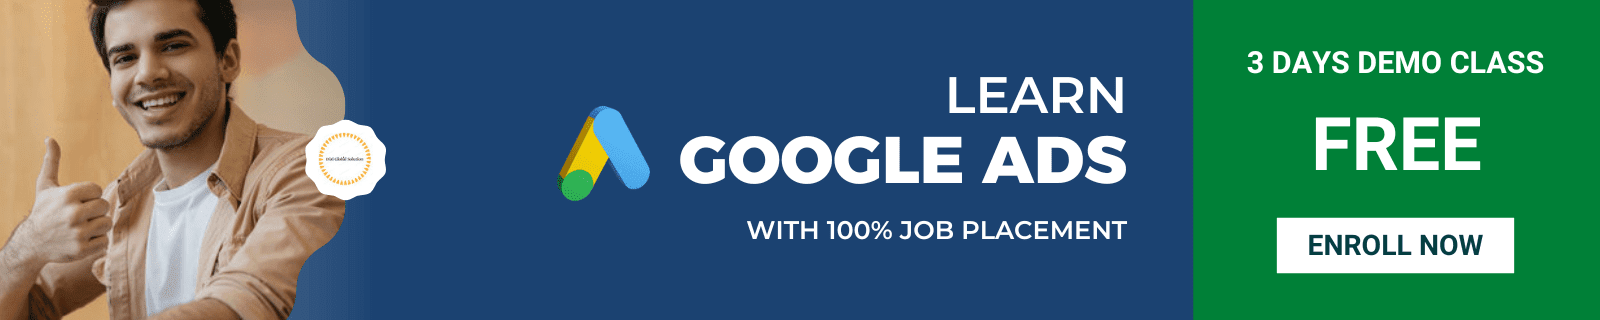 Learn Google Ads with 100% Job Placement